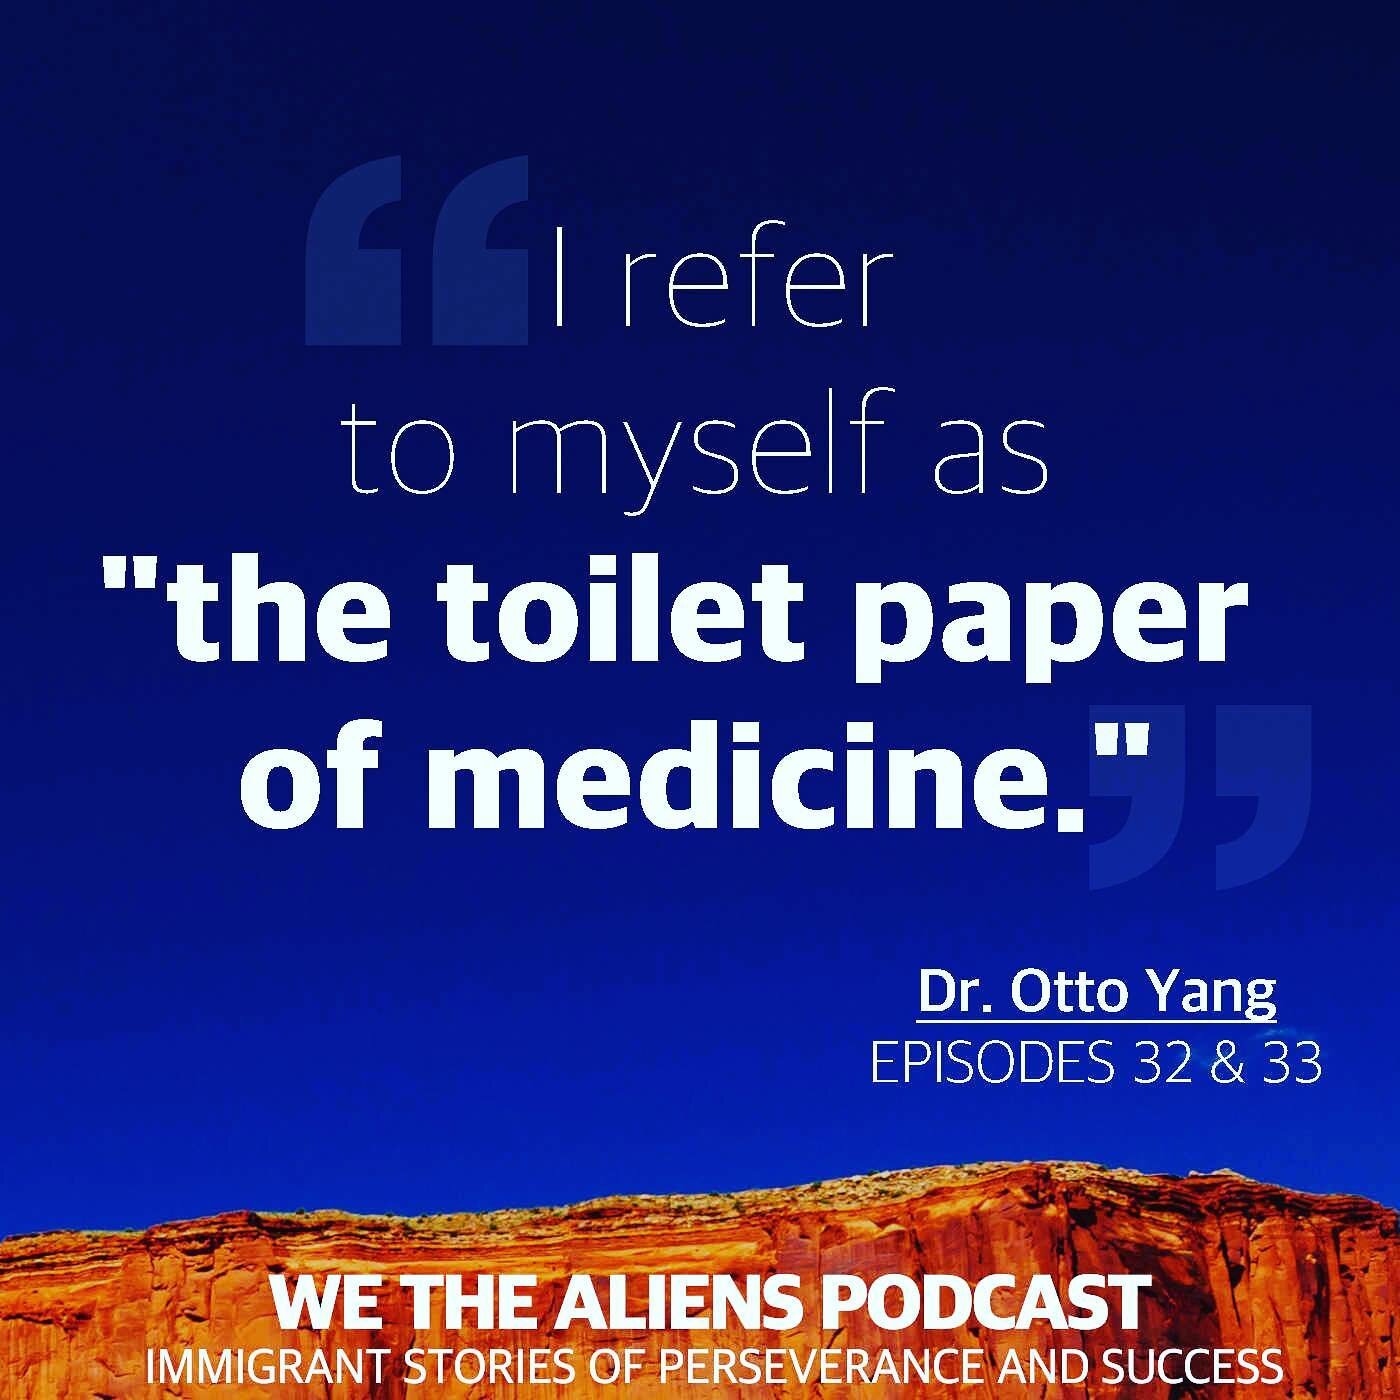 HERE&rsquo;S TO NOT TAKING TYE ESSENTIAL FOR GRANTED.
.
.
.
This week on the podcast - 

Dr. Otto Yang is a first-generation Taiwanese-American and the Associate Chief of the Infectious Disease at UCLA. 
.
Dr. Yang has a background in clinical infect